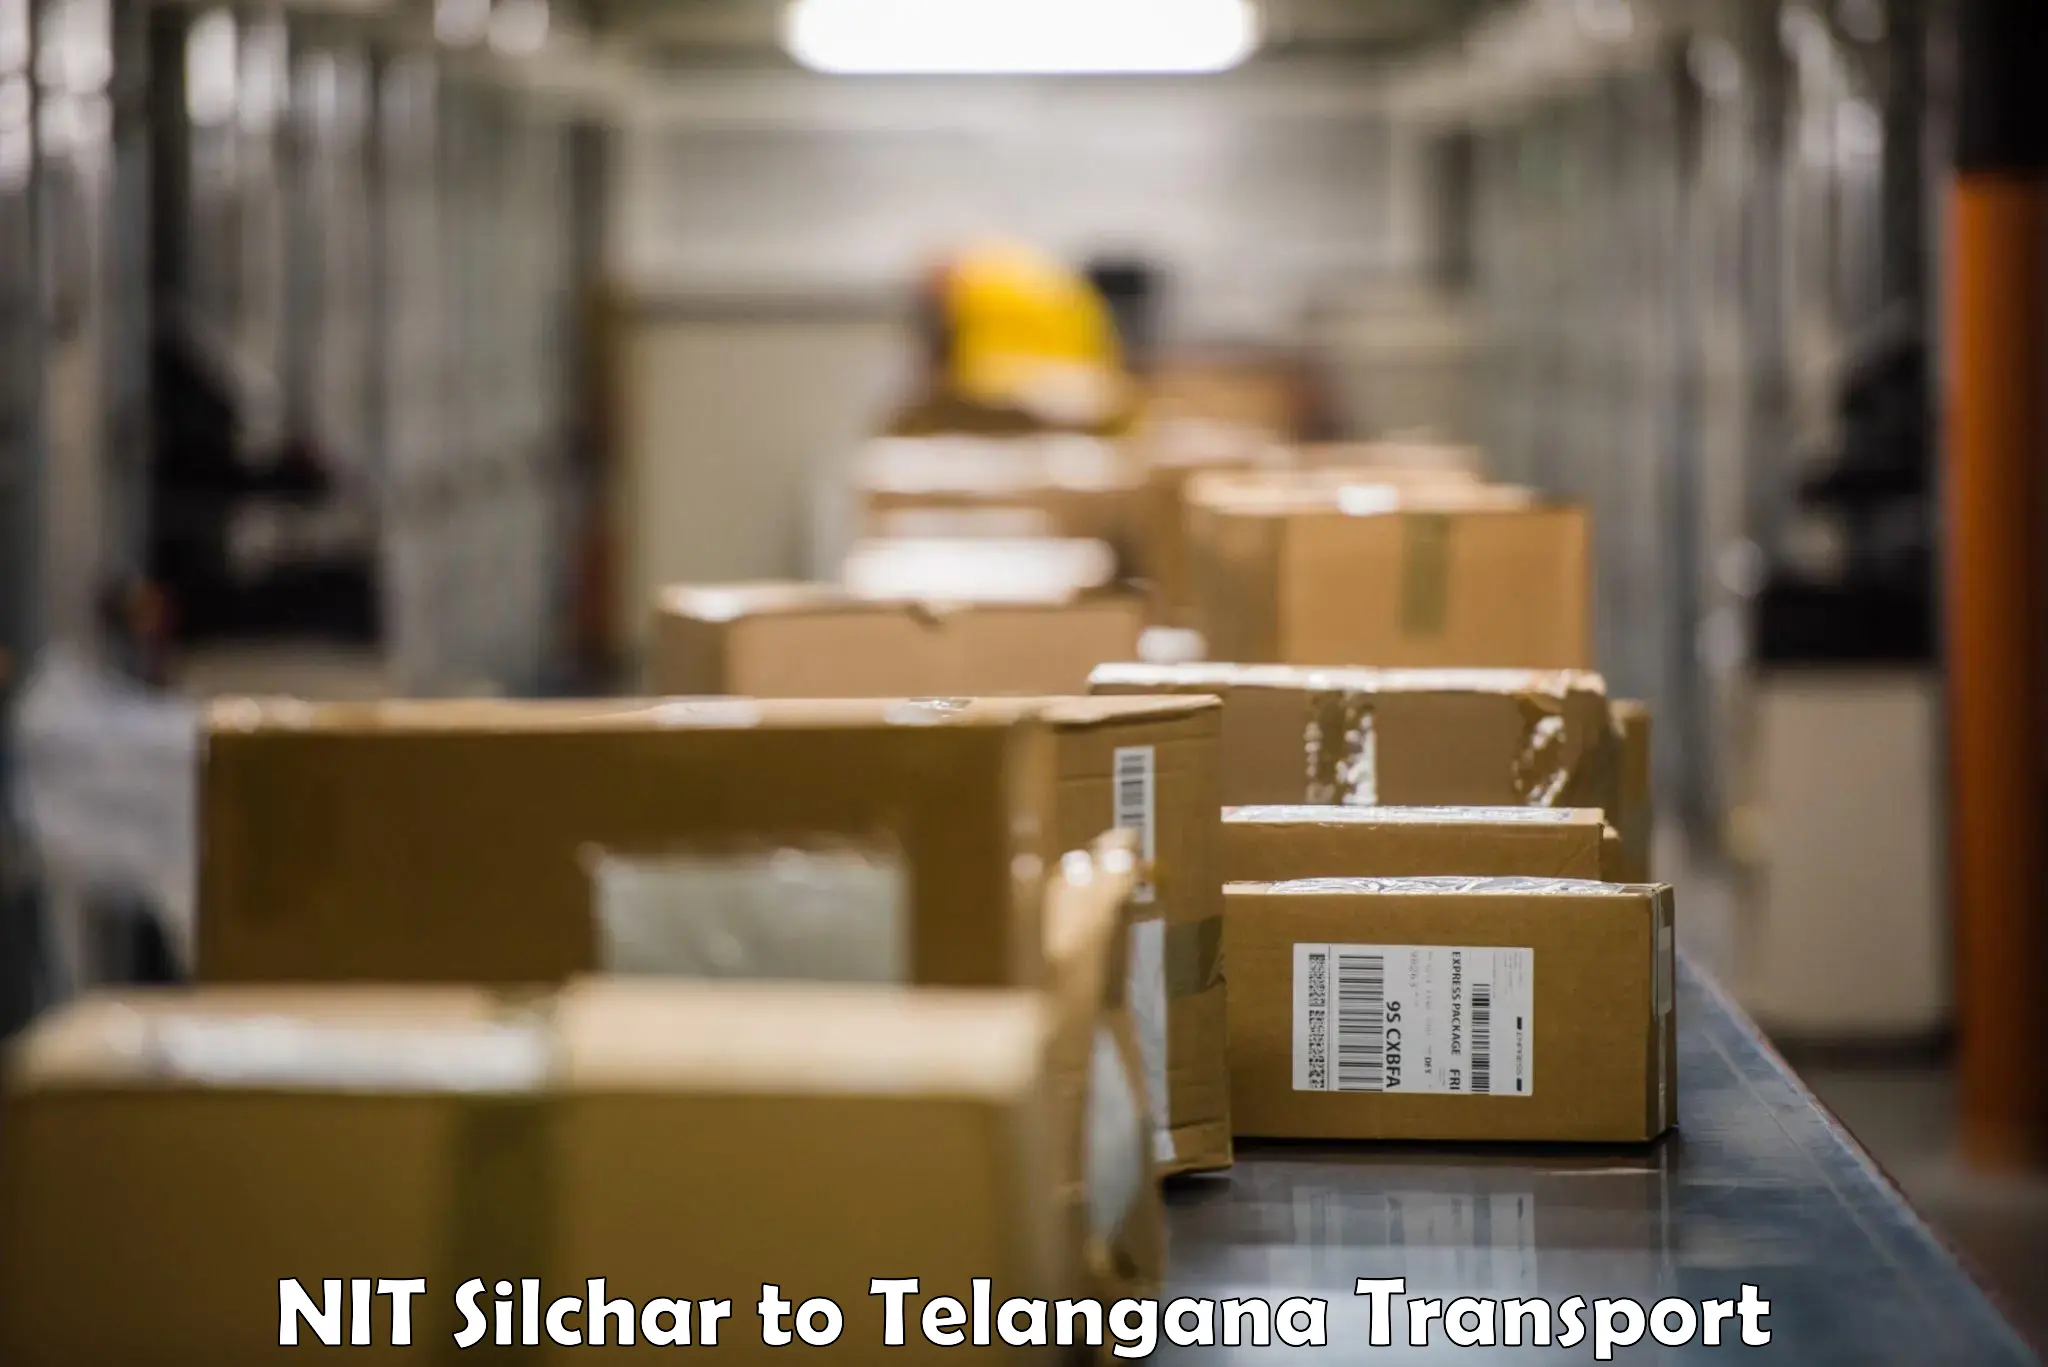 Pick up transport service NIT Silchar to IIT Hyderabad